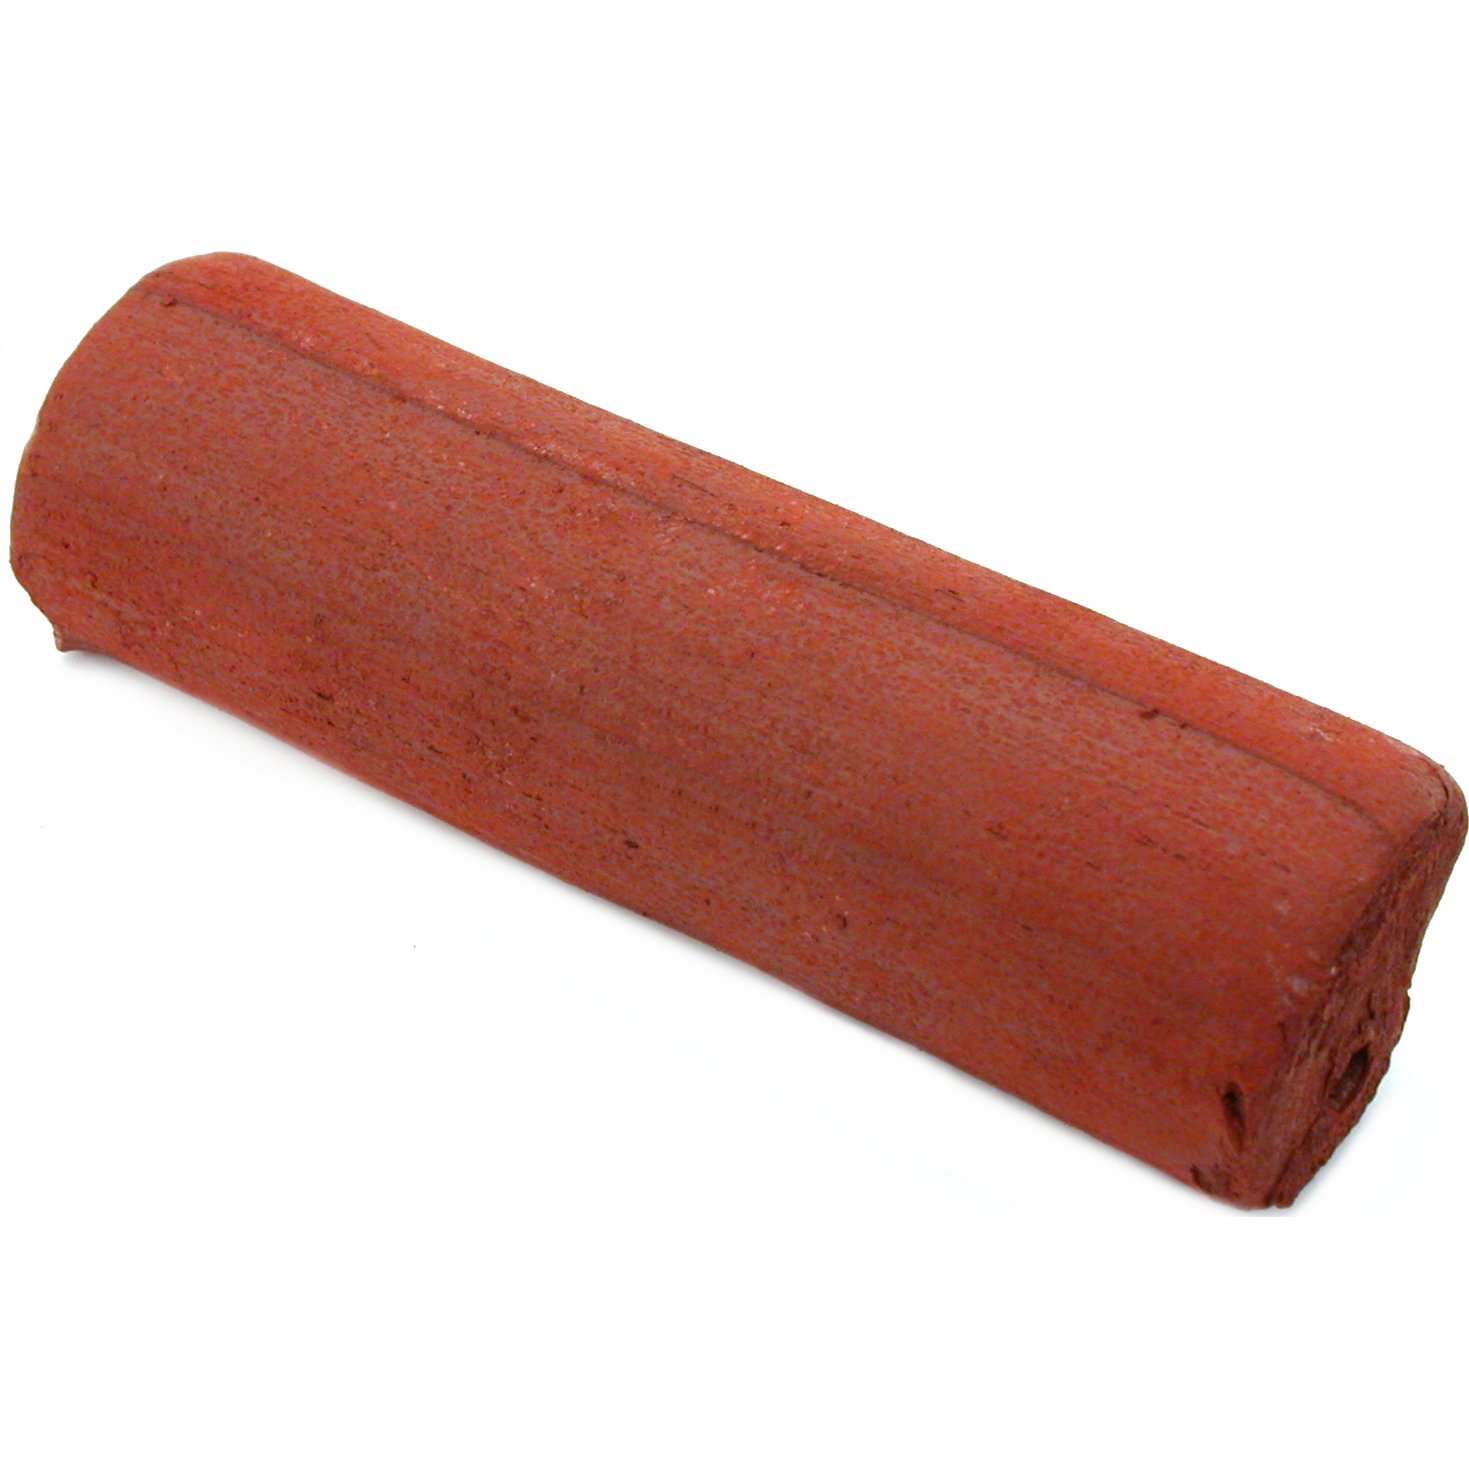 Findingking Red Rouge Polishing Compound Jewelers Tool 1 LB Bar